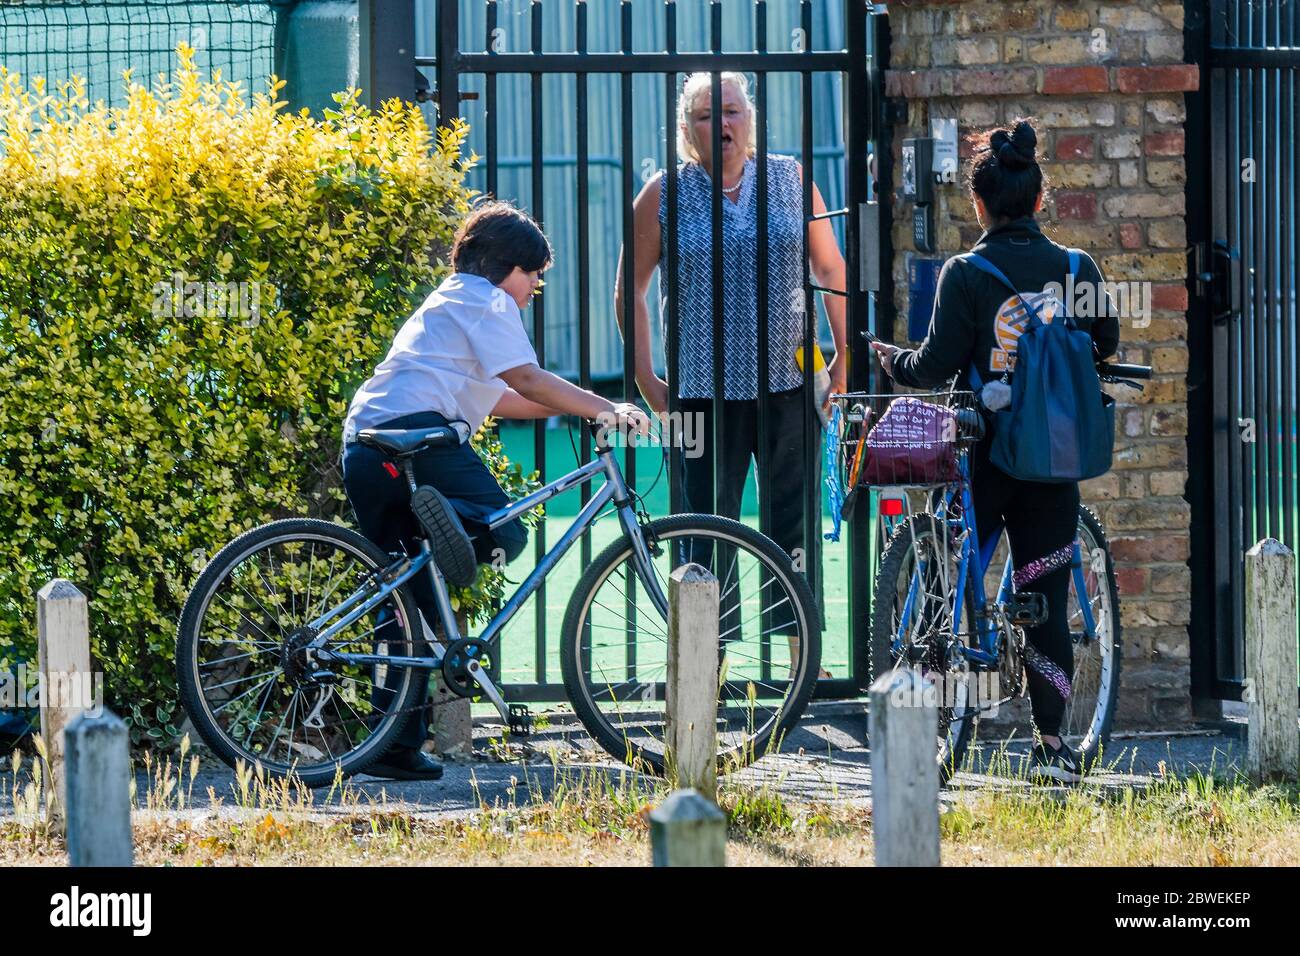 London, UK. 01st June, 2020. A limited number of years go back to pre and primary schools as the government continues to relax restrictions. The easing of 'lockdown' for the Coronavirus (Covid 19) outbreak, in London, begins its next stage of easing. Credit: Guy Bell/Alamy Live News Stock Photo